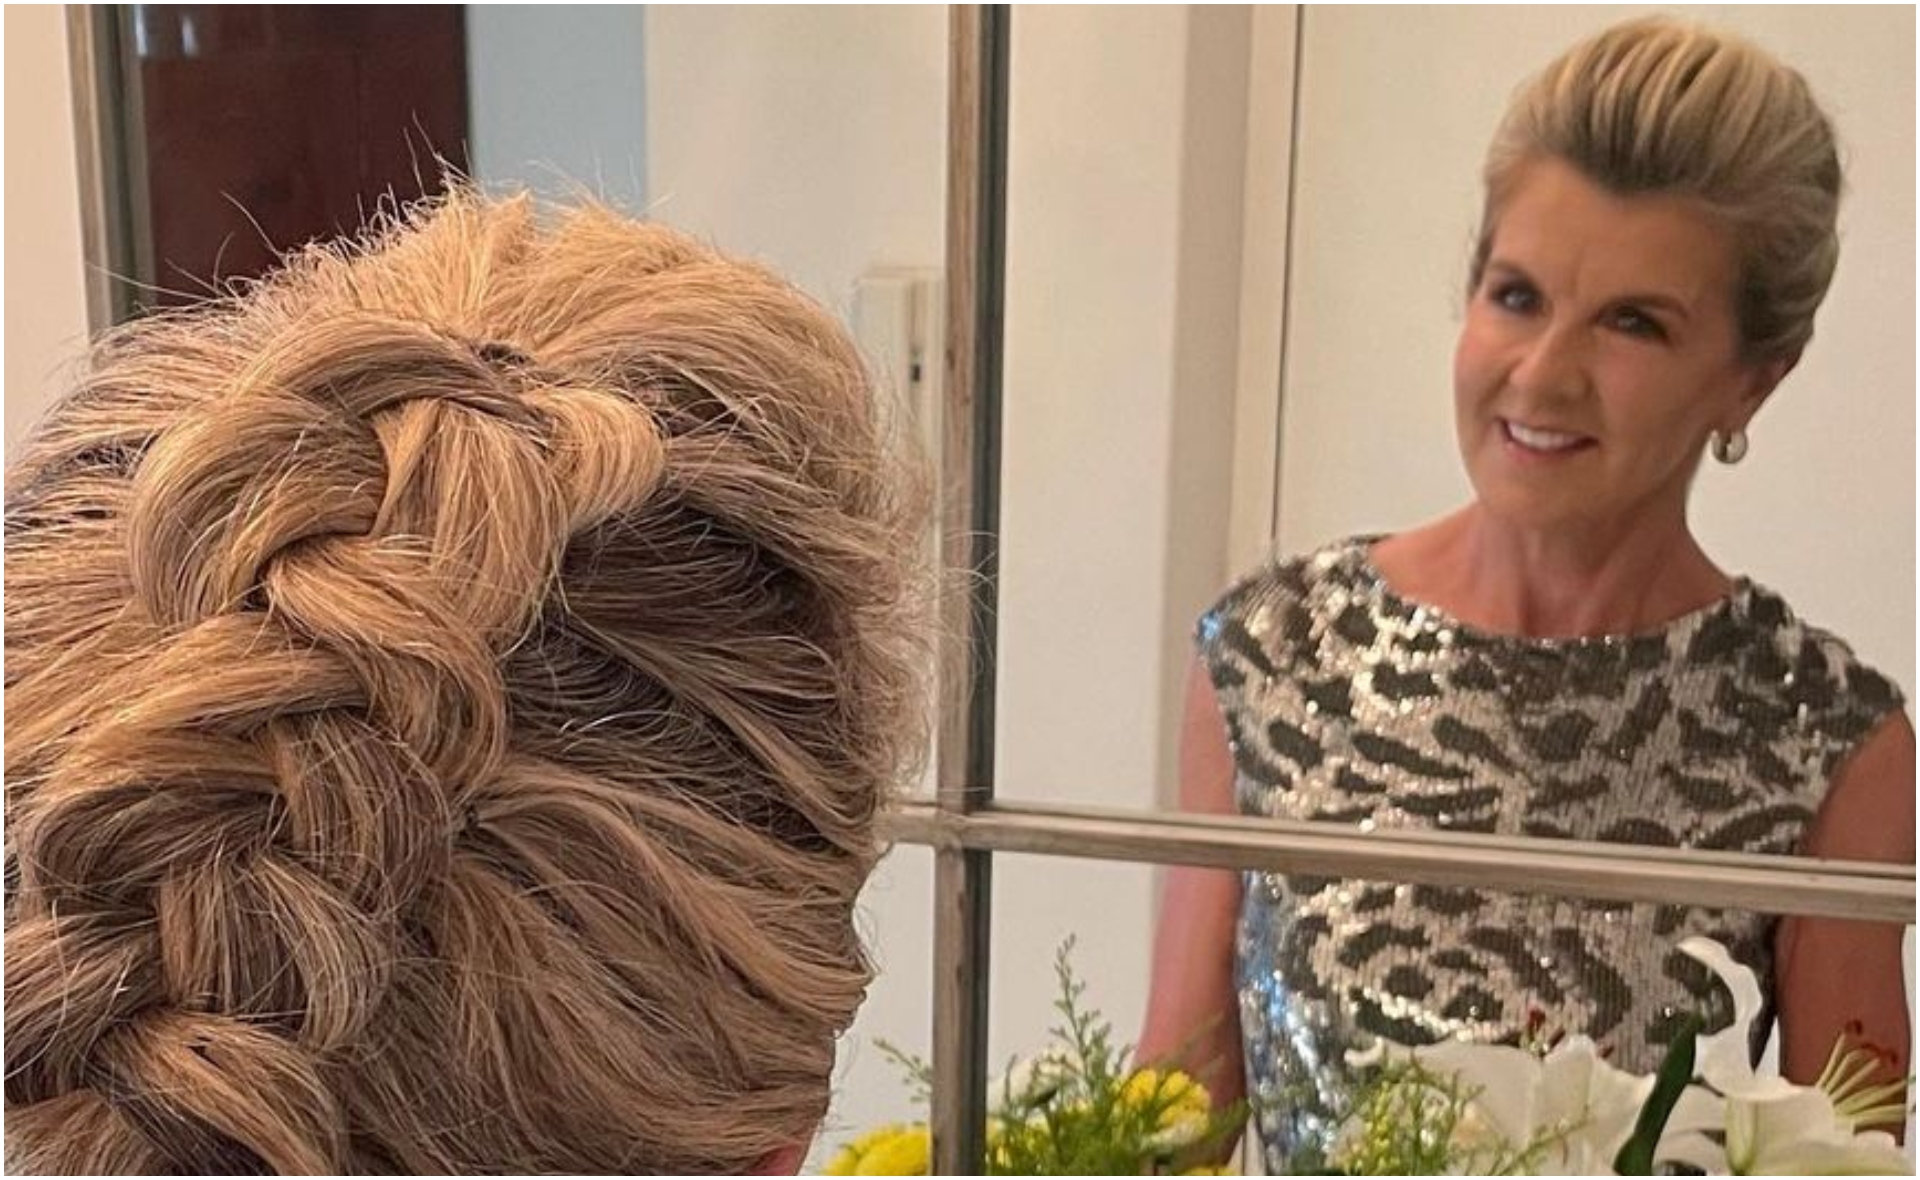 Julie Bishop reveals how long her has grown as she wears it loose in a 60s-style ‘do in new picture